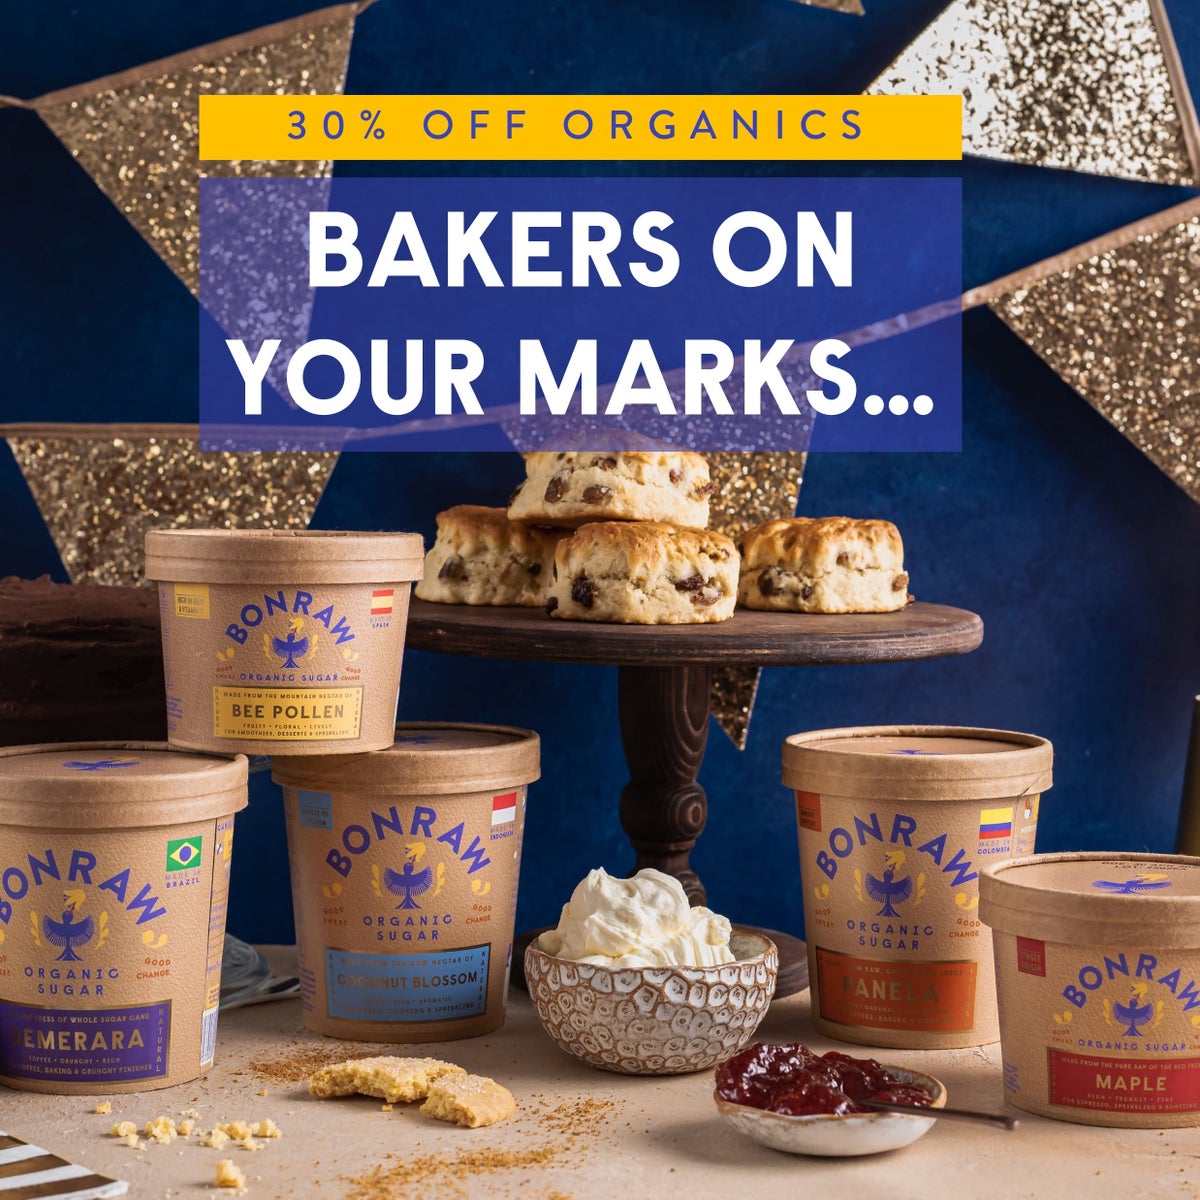 30% Off Organic Sugars. Bakers on your marks...